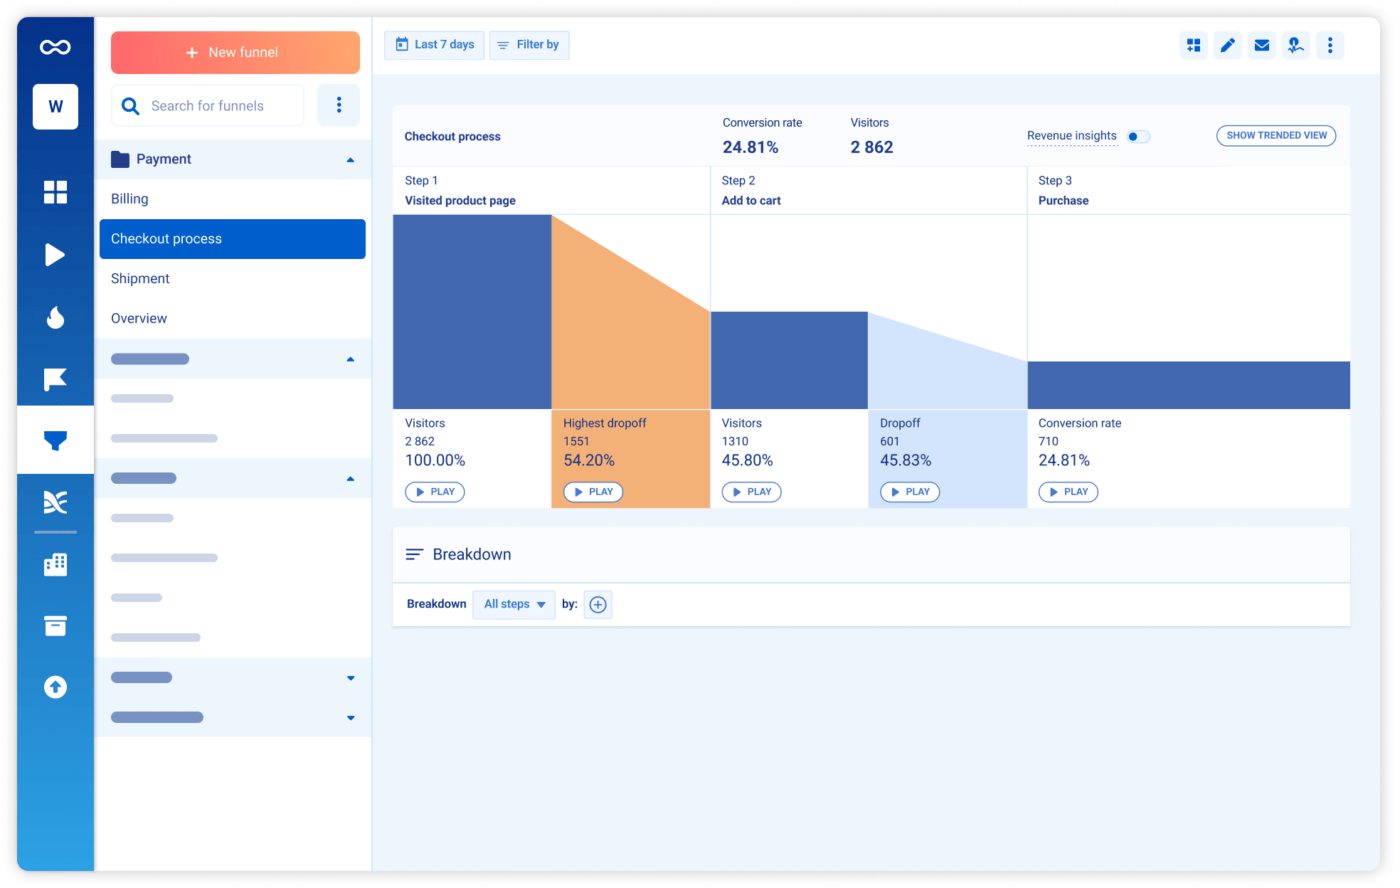 Smartlook's Checkout process analytics